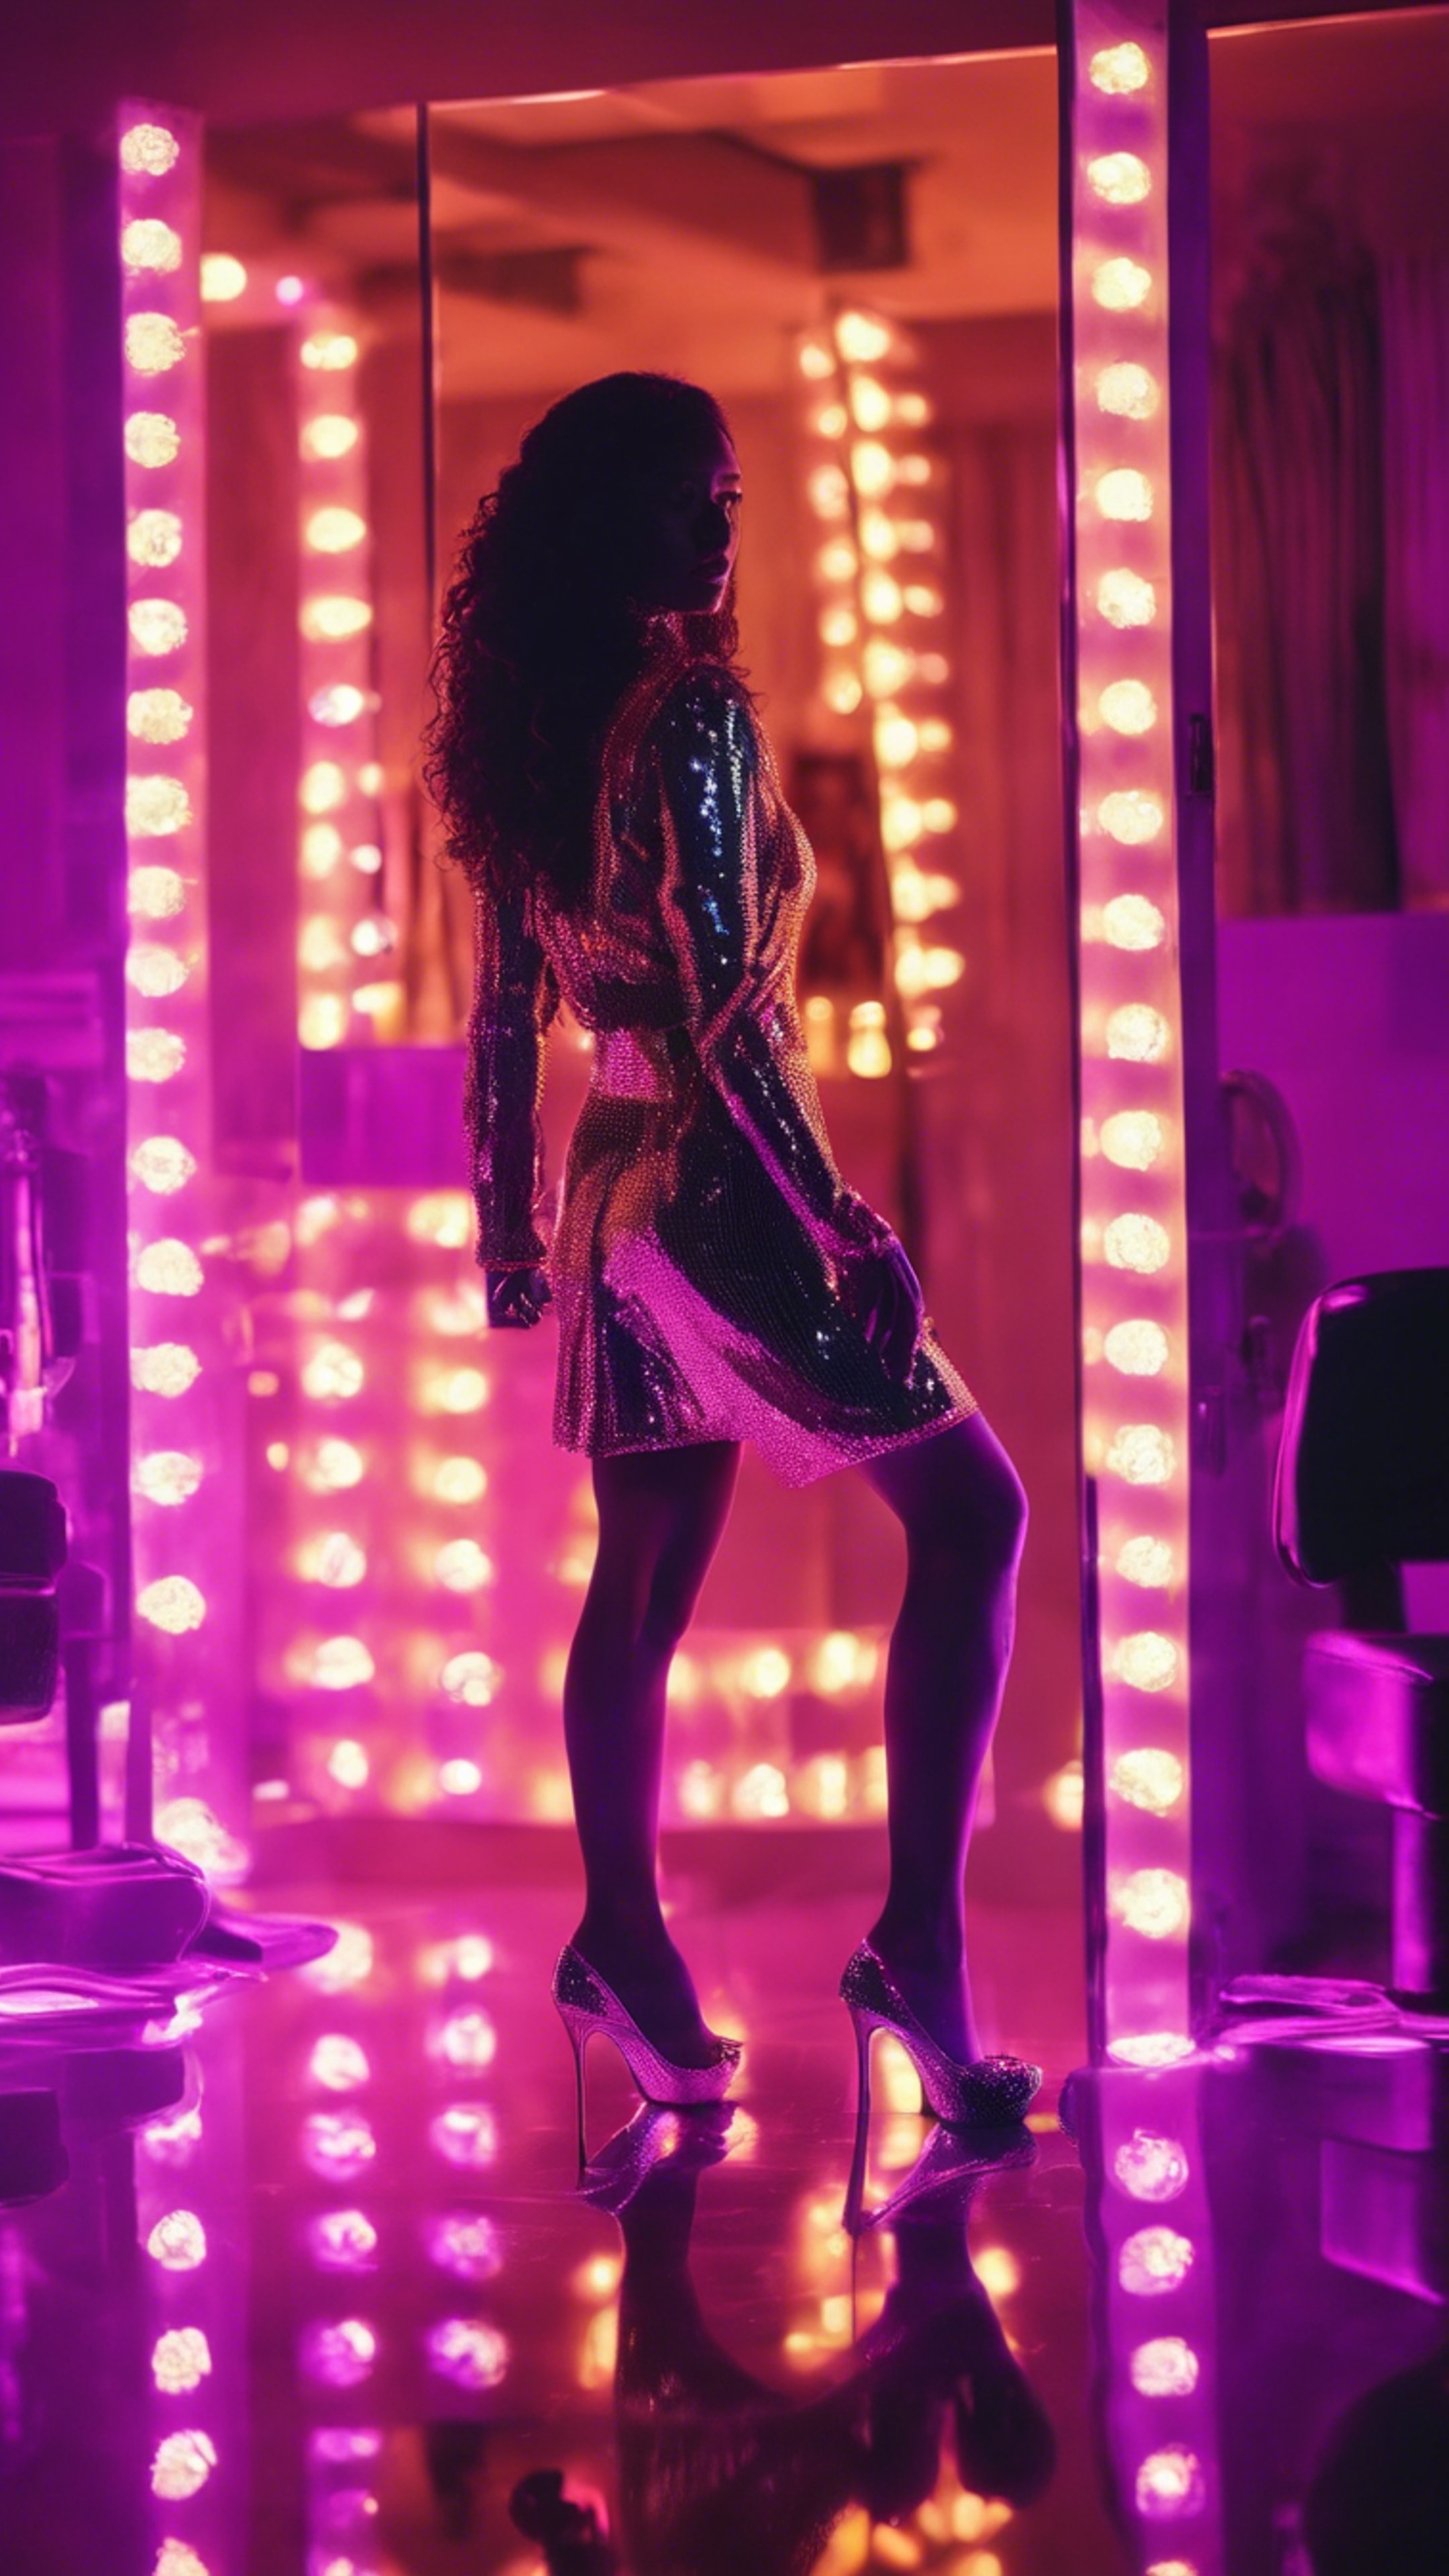 A confident baddie in a neon-lit room, dressed in sequins and high heels, her silhouette reflecting in the mirror. Ταπετσαρία[dd190a8a8fd944b882f7]